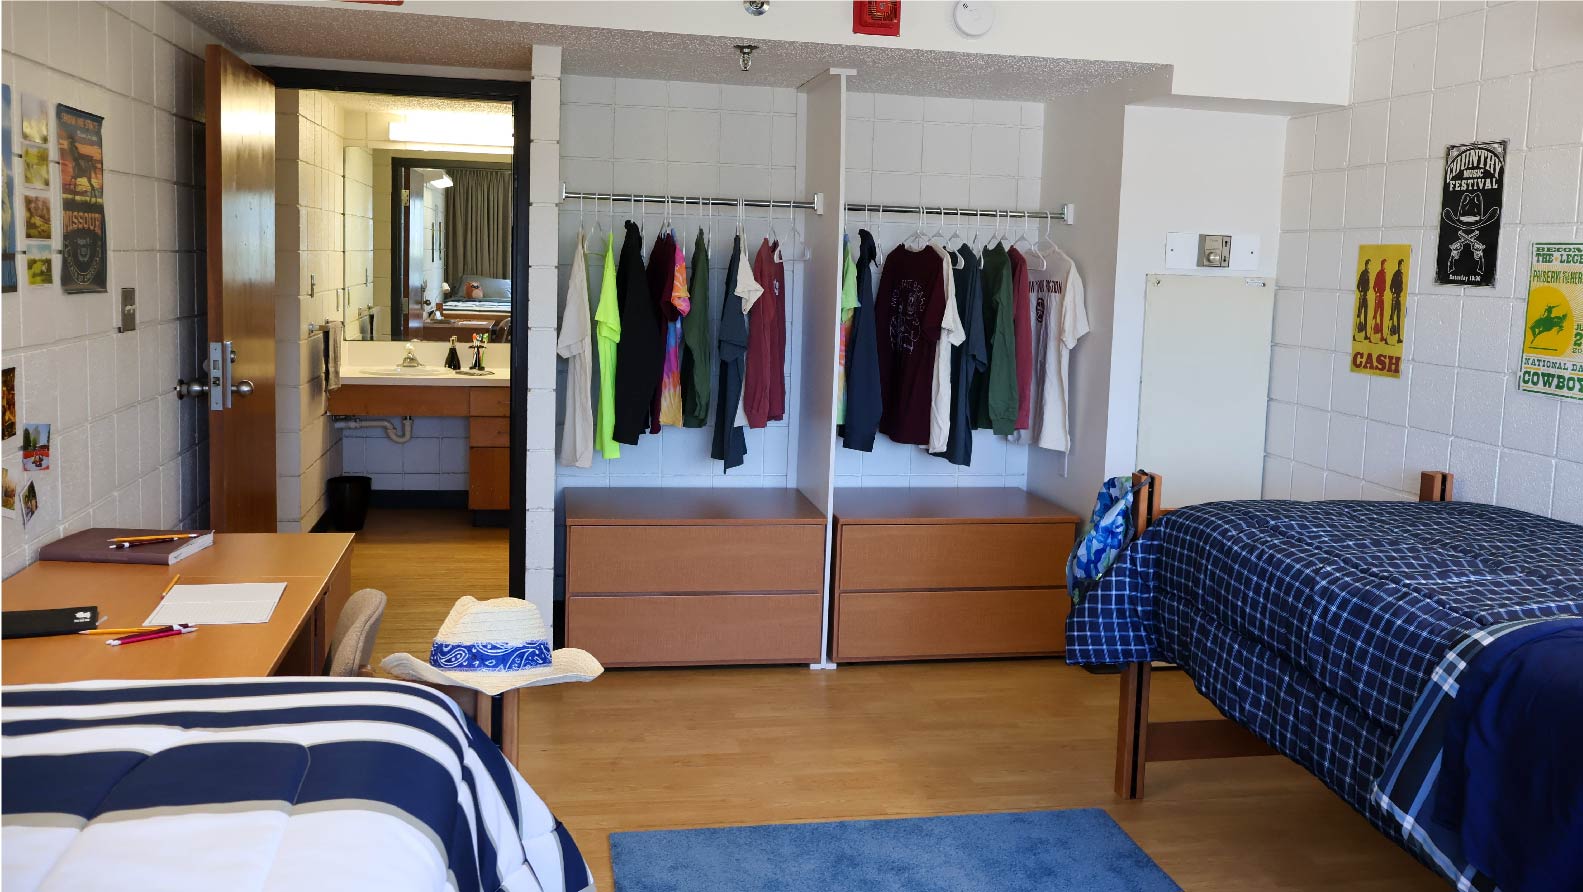 Bedroom with 2 closet spaces each with 2 drawers of storage and hanging bar